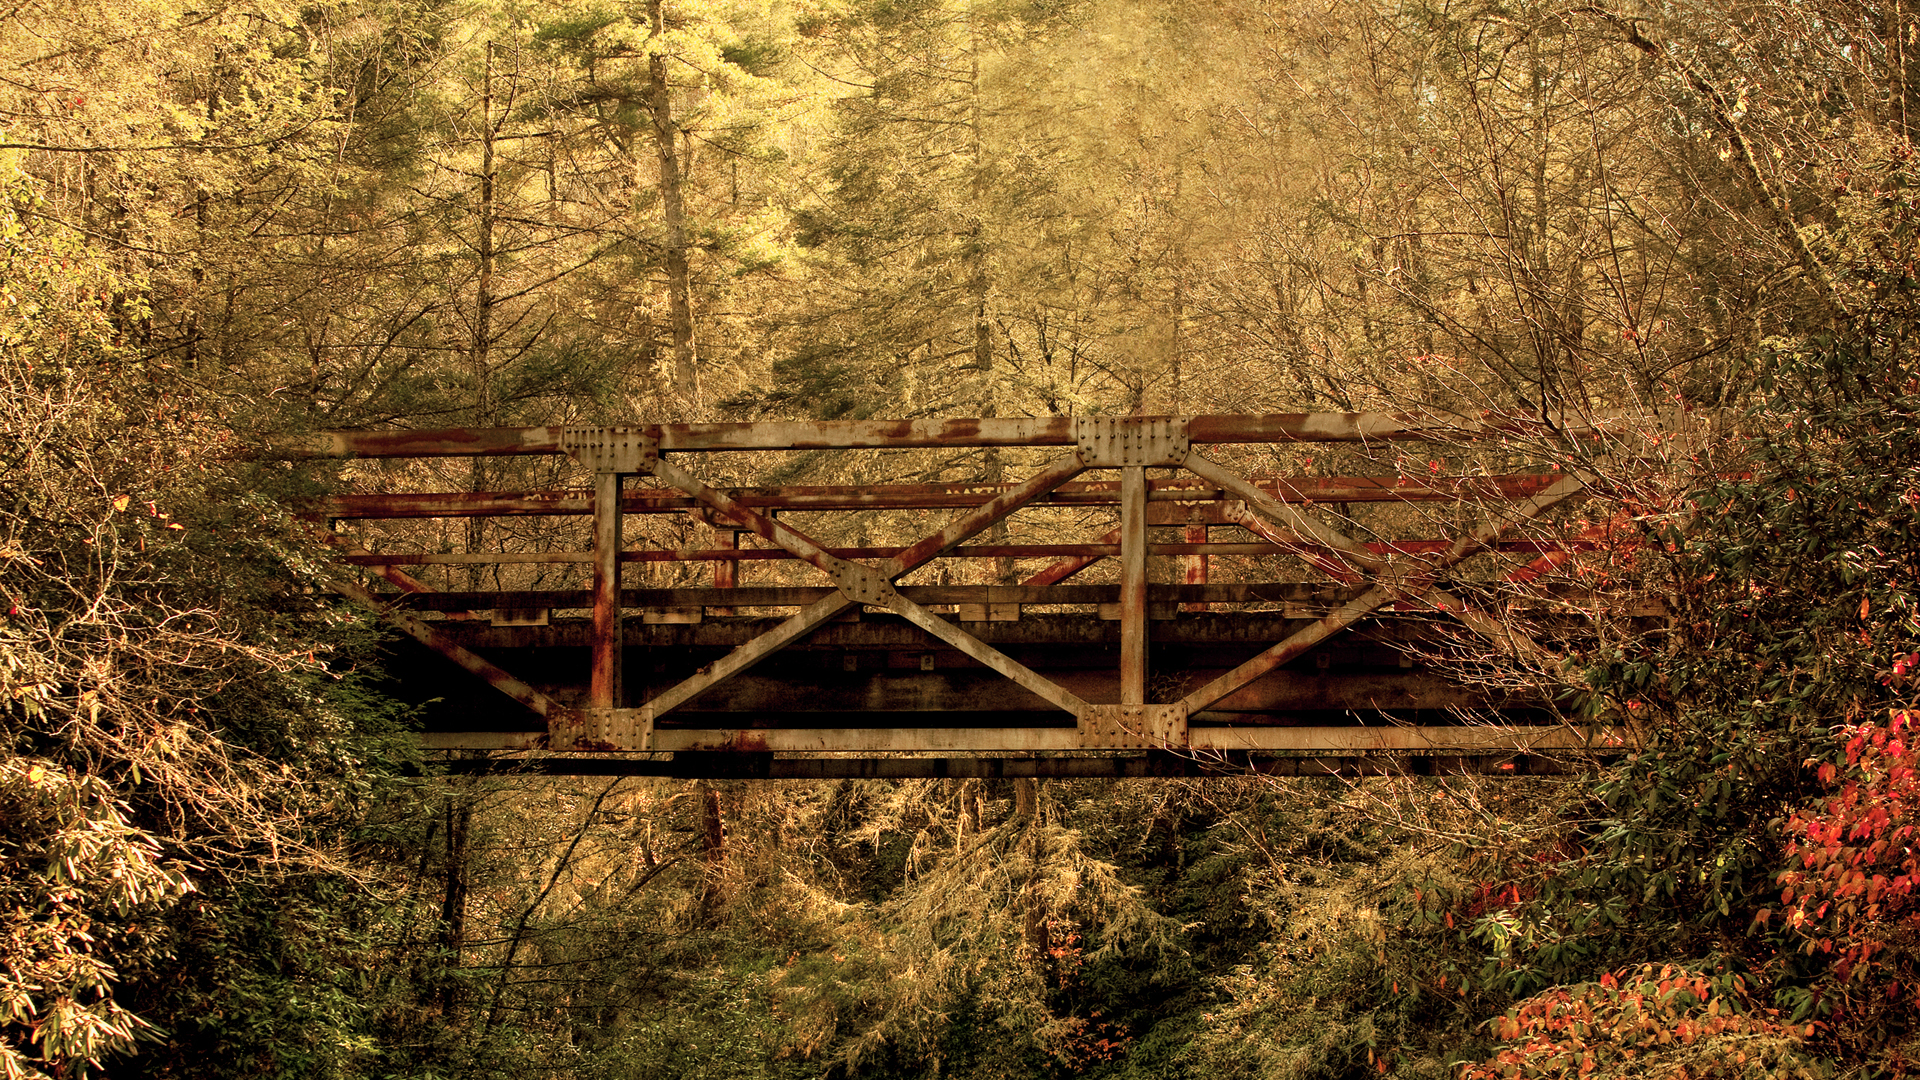 trestle, Rust, Frame, Bridges, Architecture, Structure, Tracks, Railroad, Roads, Path, Metal, Steel, Nature, Trees, Forest, Leaves, Scenic Wallpaper